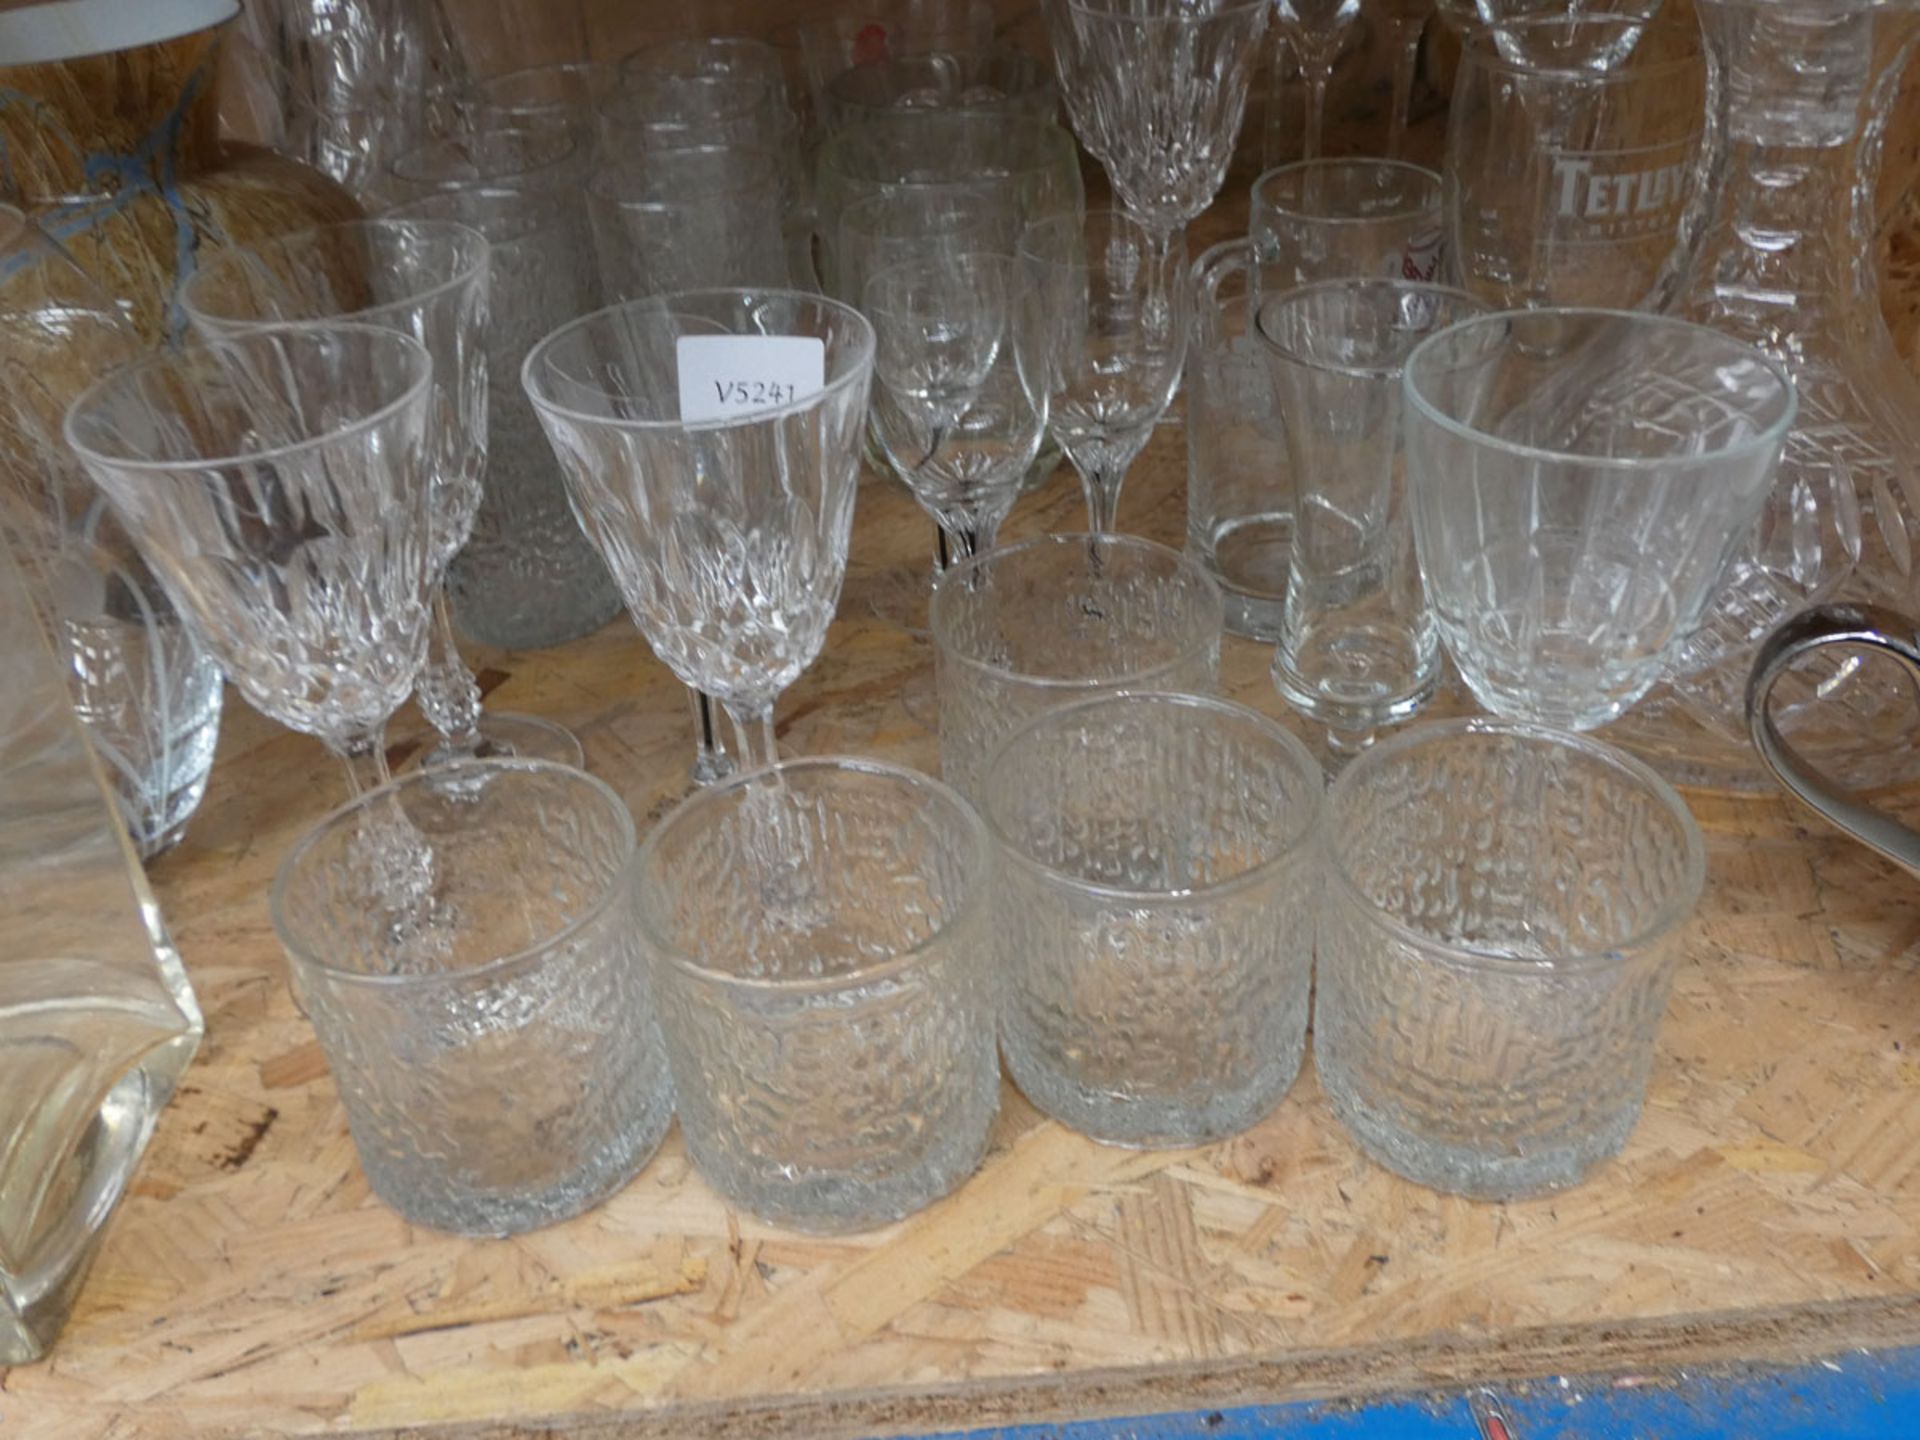 Quantity of wine glasses, tumblers, sherry glasses, vases and a decanter - Image 4 of 4